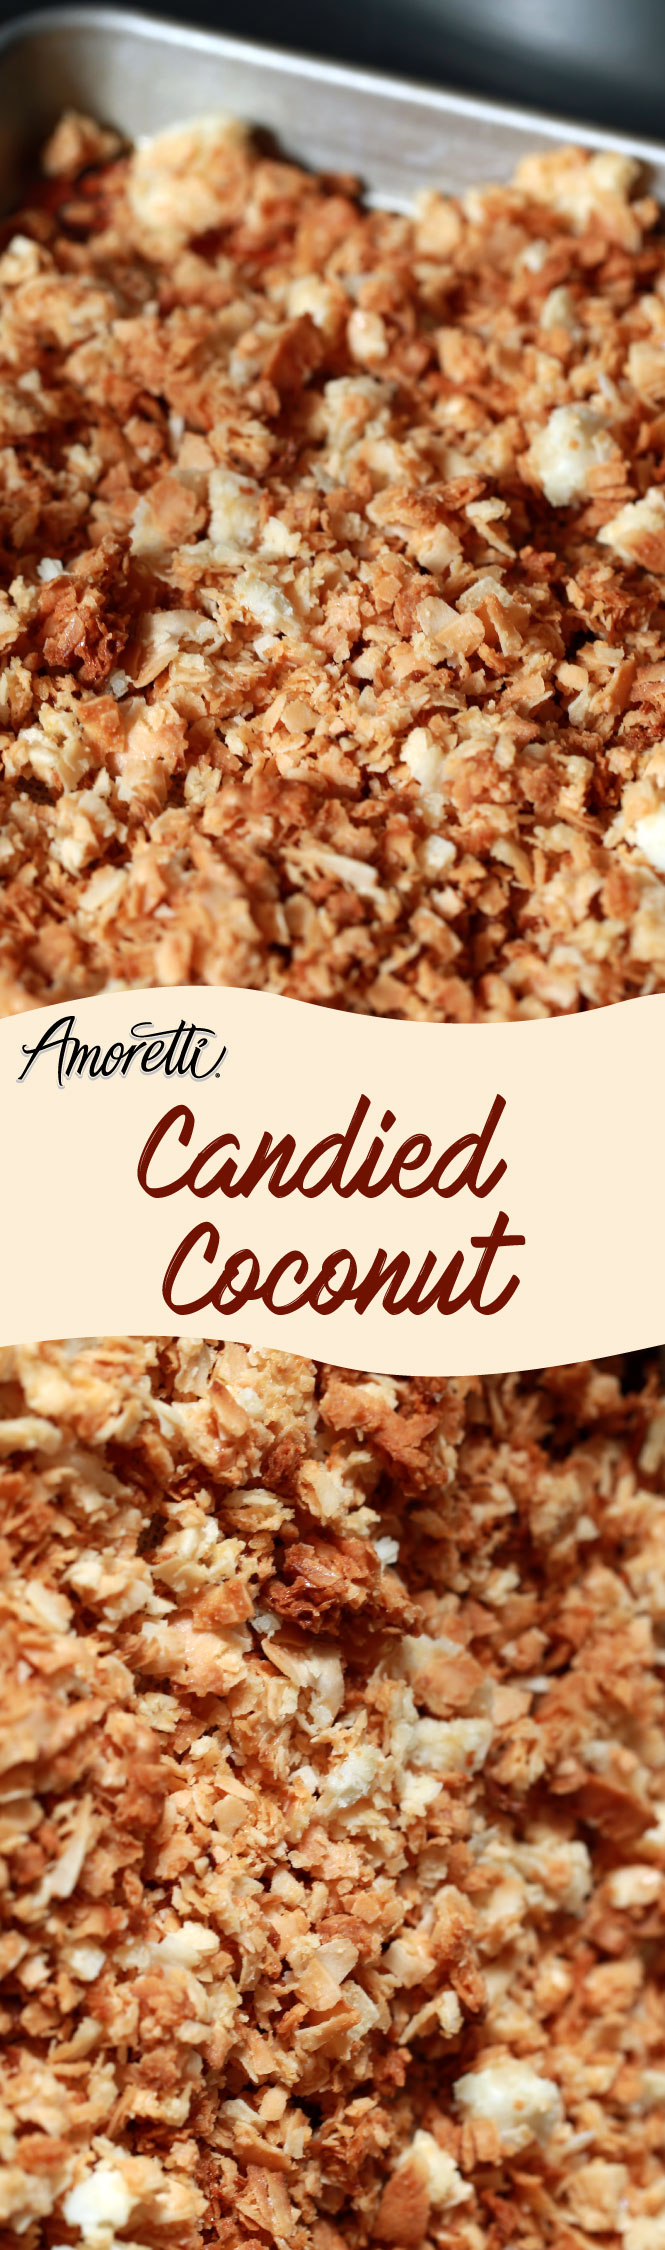 Candied Coconut for topping ice cream, granola, and much more!